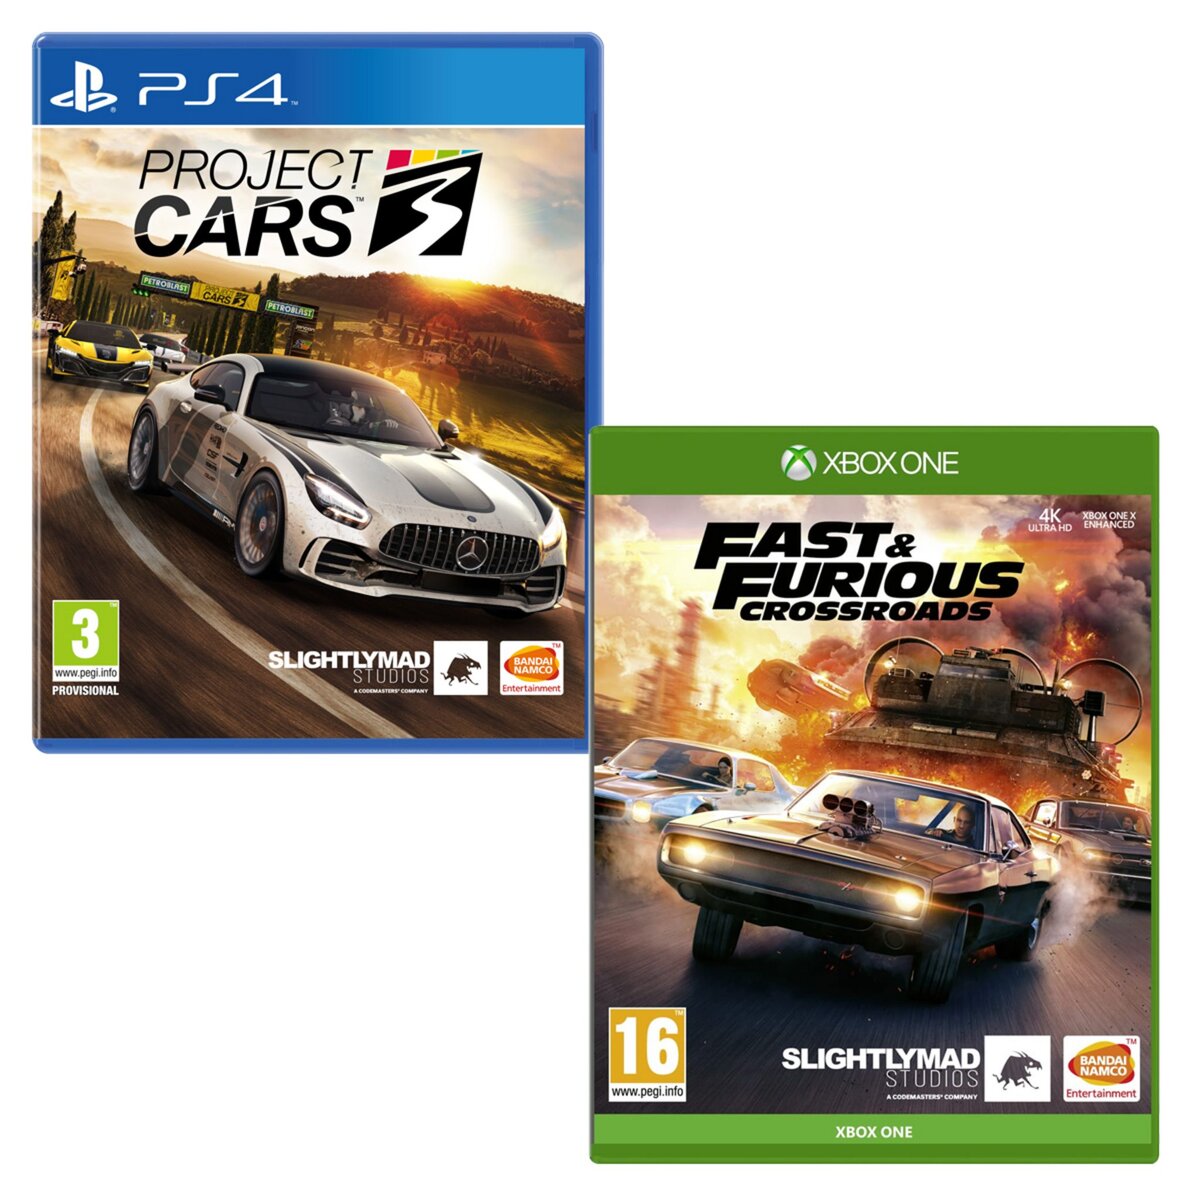 Namco Project Cars 3 PS4 + Fast & Furious Crossroads Xbox One